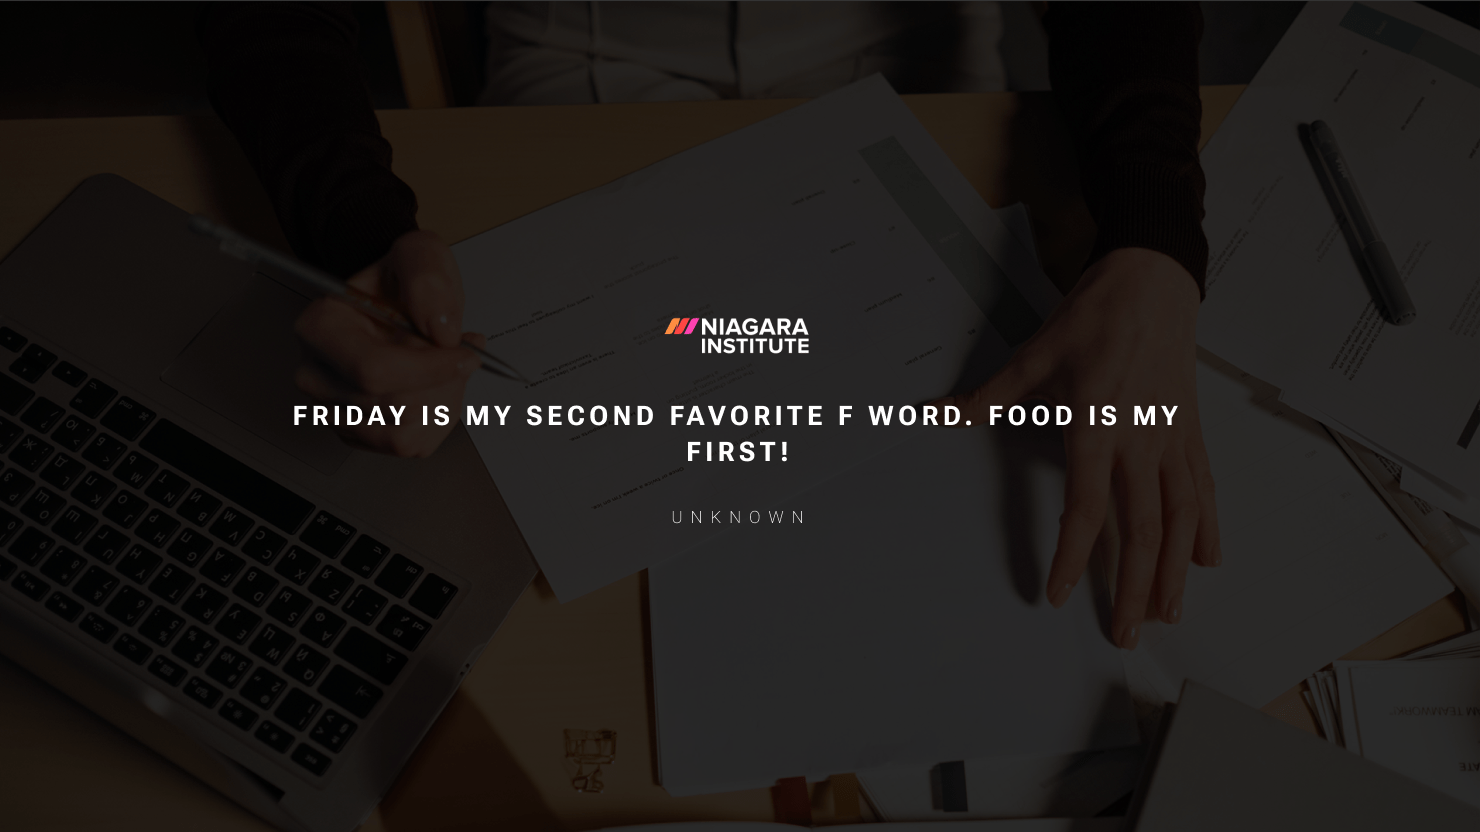 Friday is my second favorite F word. Food is my first!